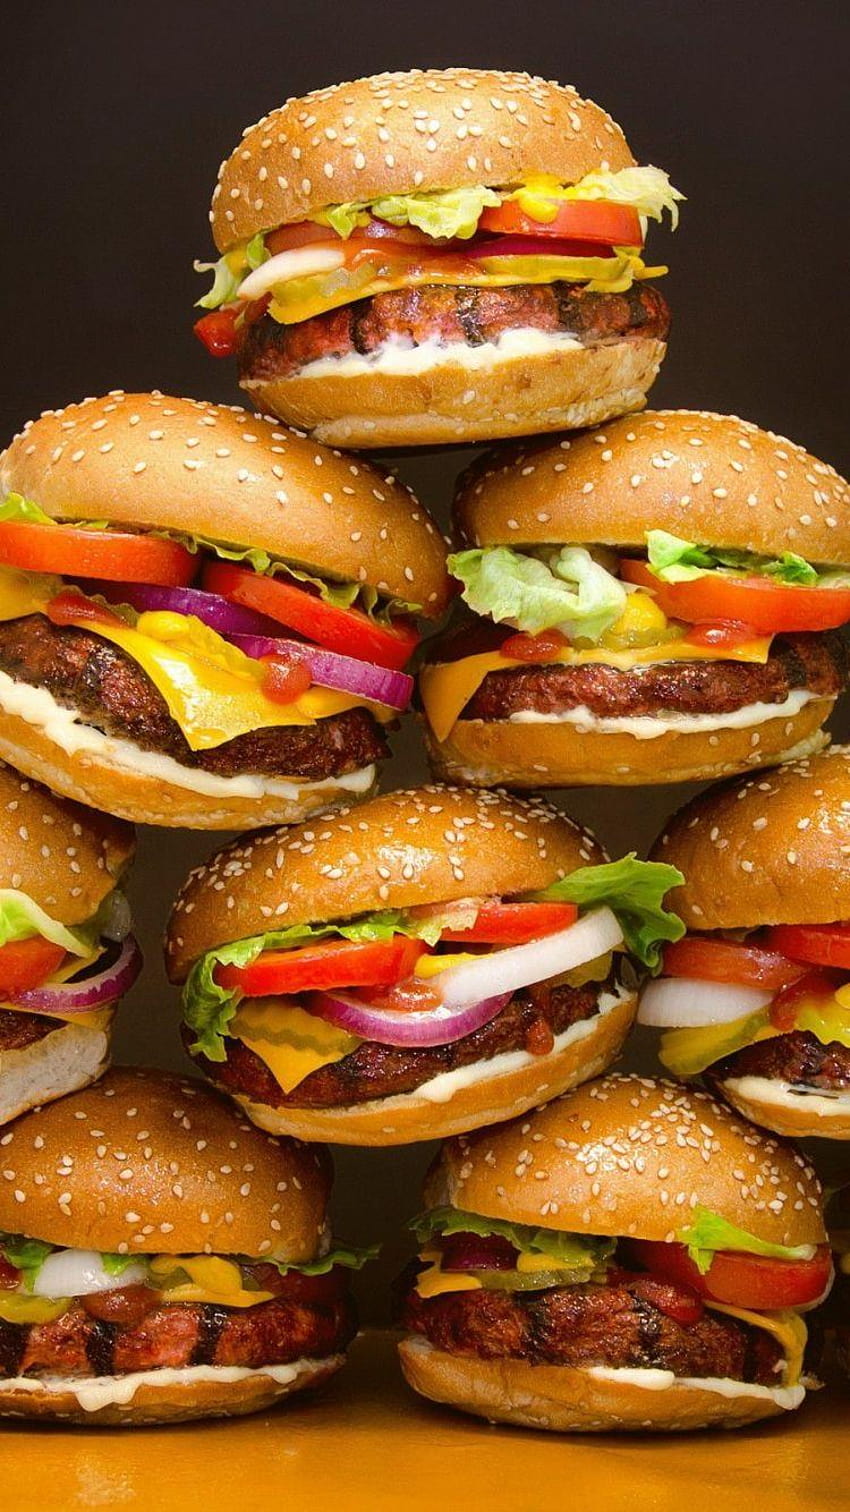 Burgers Photos Download The BEST Free Burgers Stock Photos  HD Images